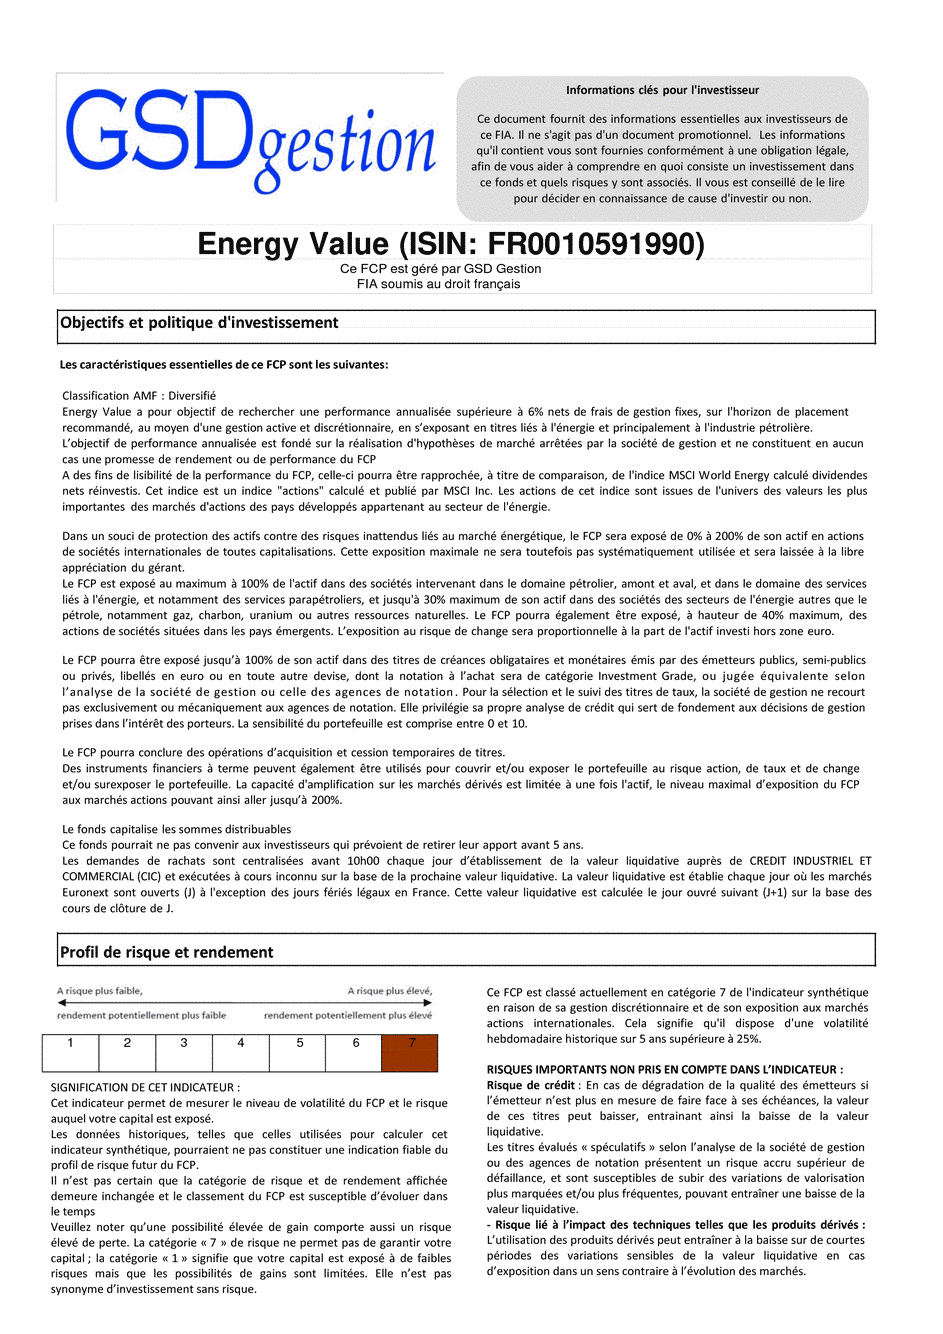 DICI-Prospectus Complet Energy Value - 30/08/2016 - undefined